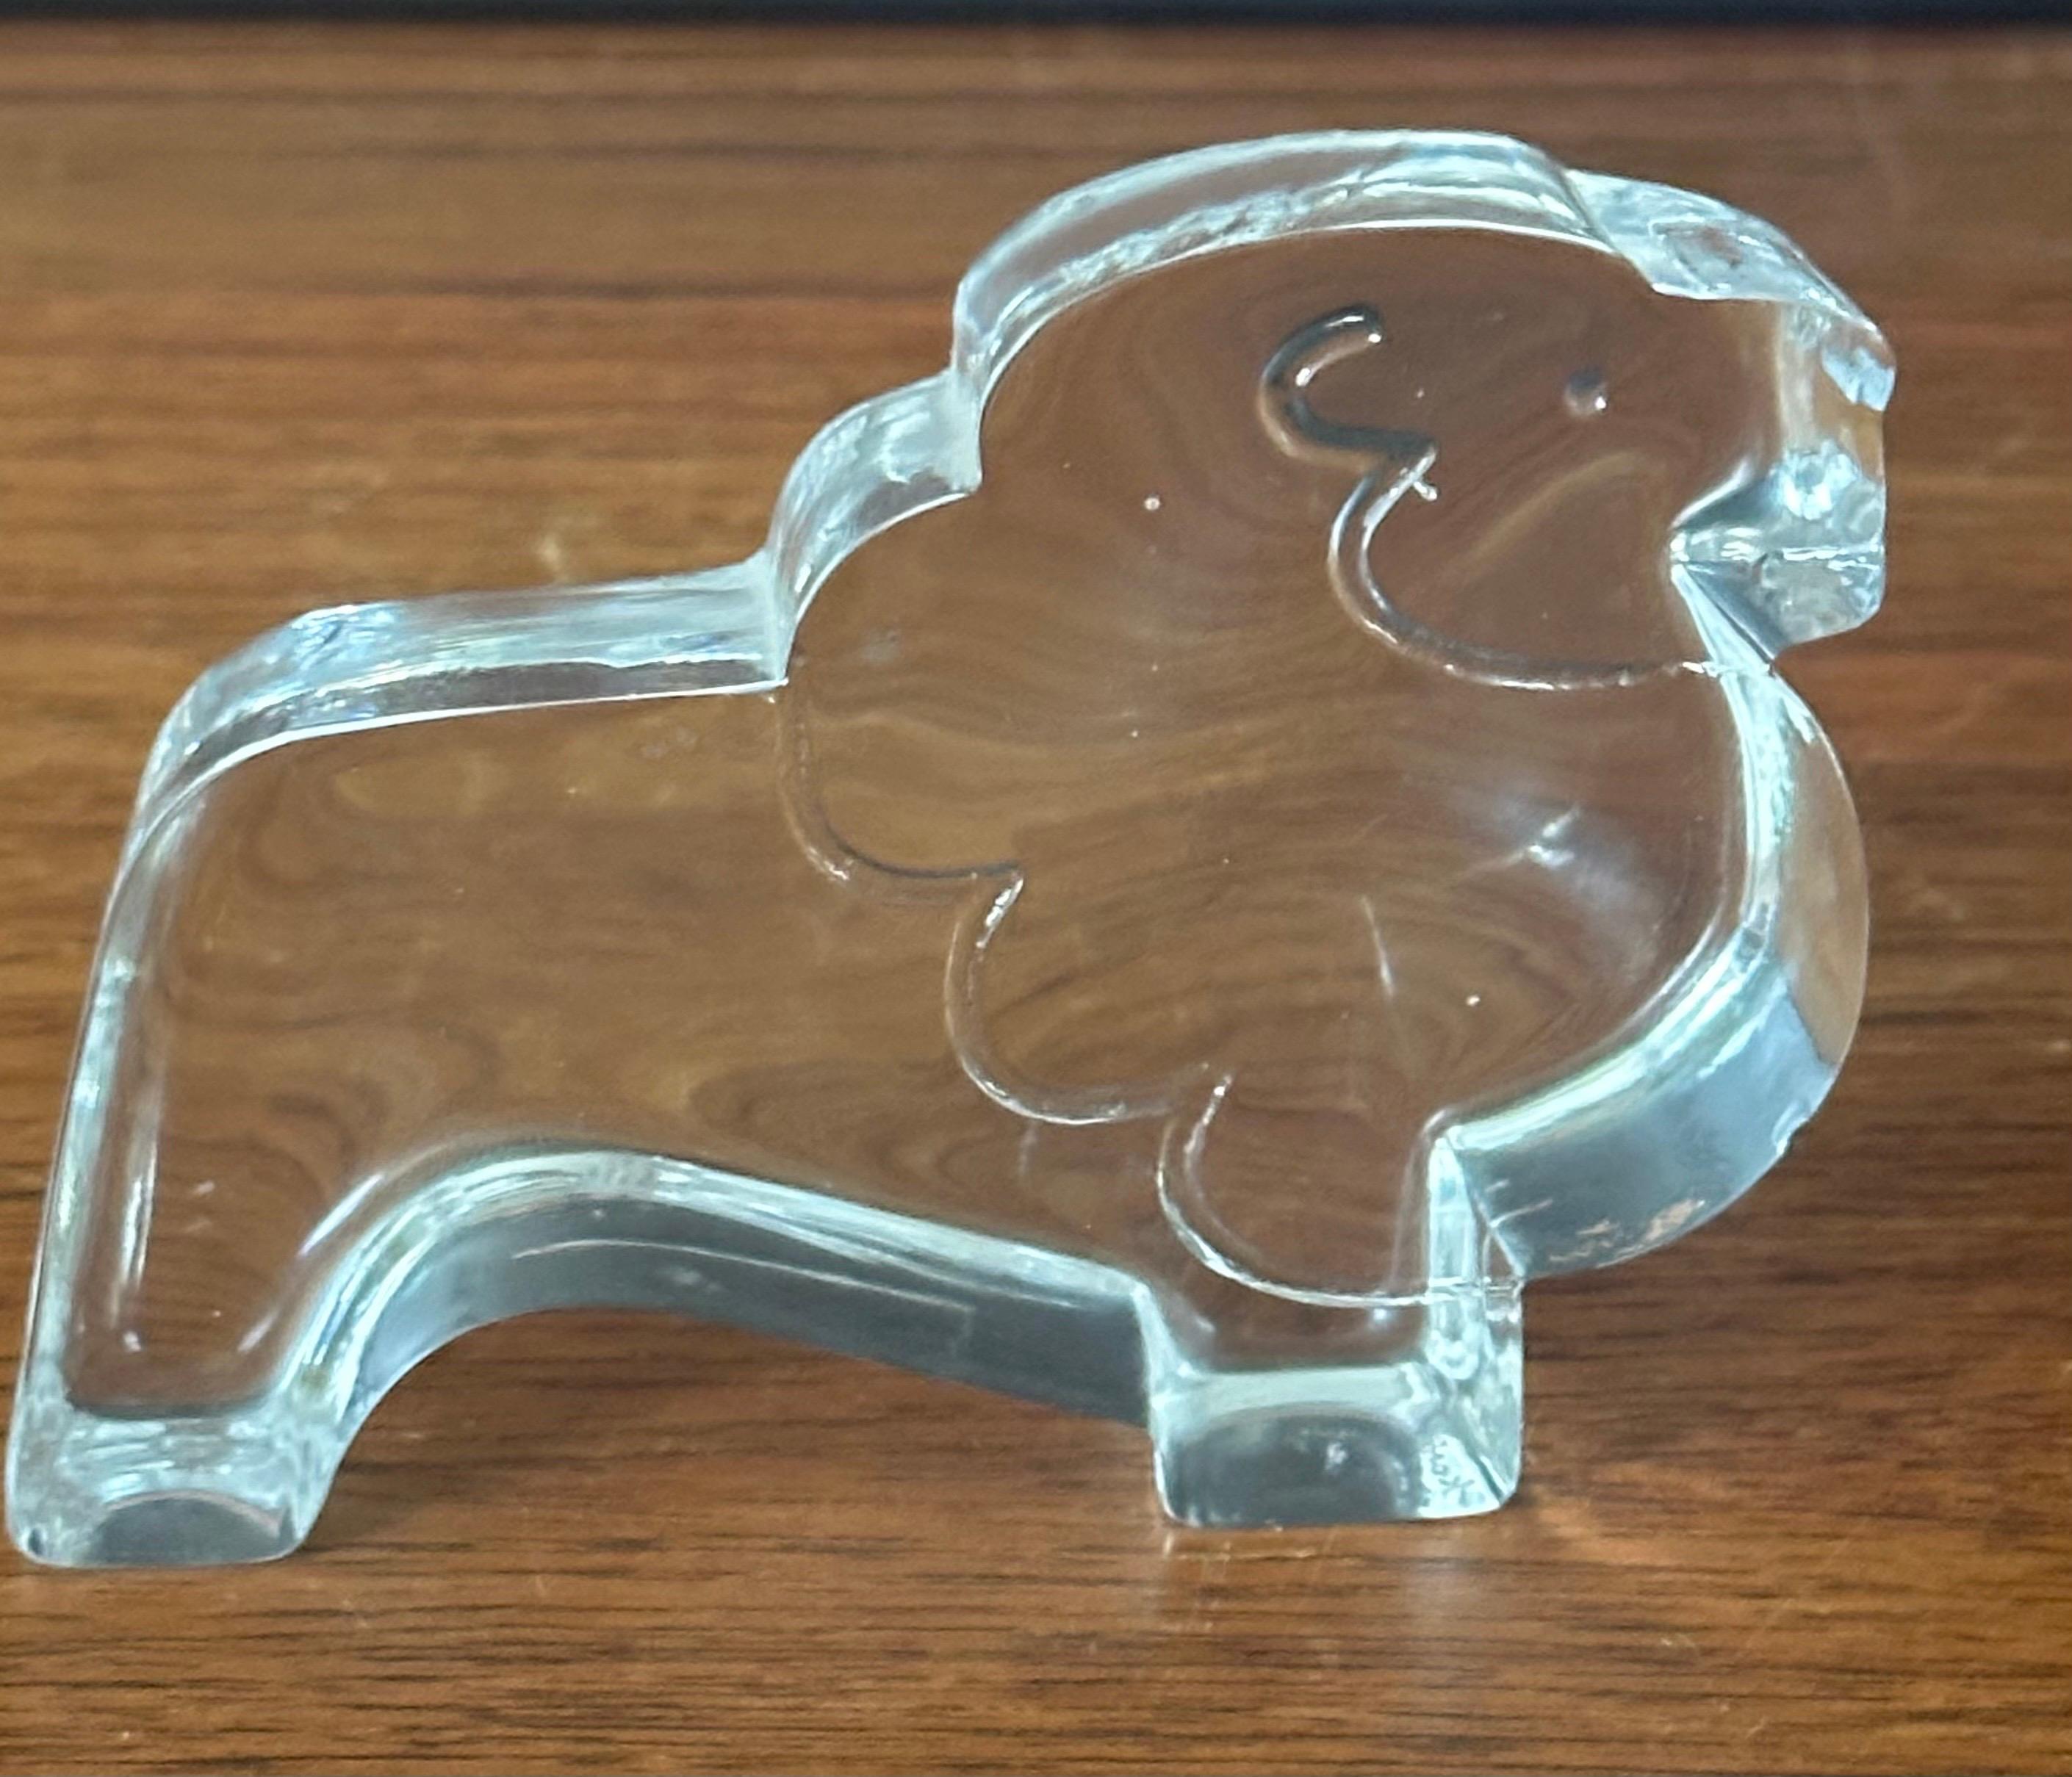 A very nice art glass lion paperweight / sculpture by Kosta Boda Sweden, circa 1980s. The piece is in very good vintage condition with no chips or cracks and measures 4.25